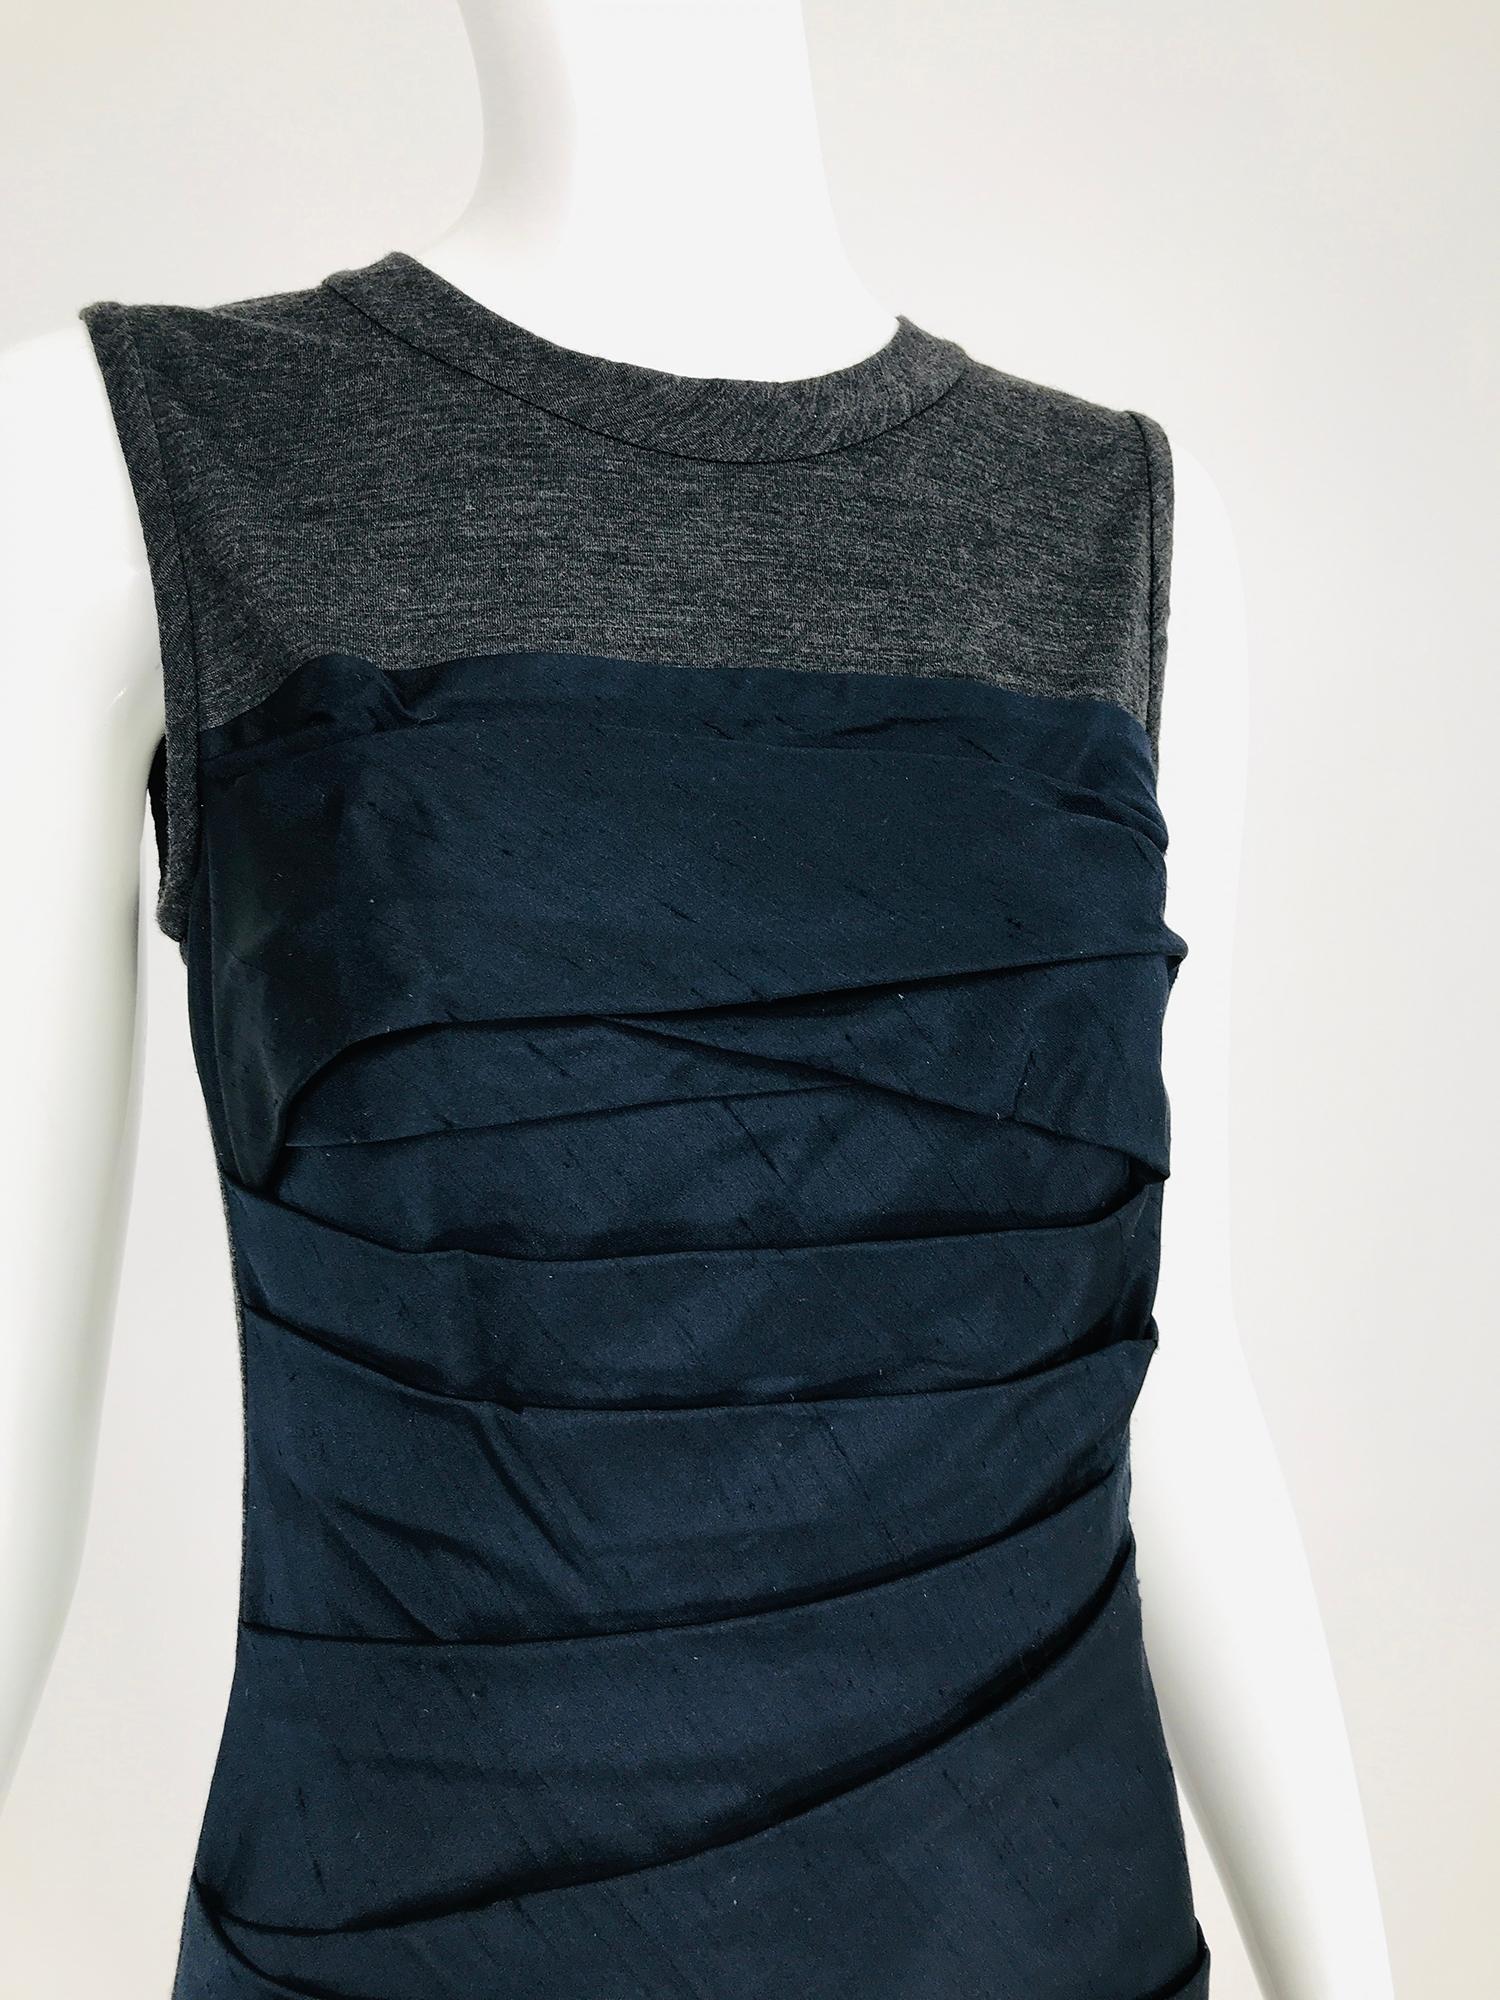 Vera Wang pleated black silk & charcoal knit jersey sleeveless sheath dress. Fitted, sleeveless dress with a jewel neckline, the upper bodice, dress back and interior front are charcoal knit jersey. The torso to the hem of the dress front is done in